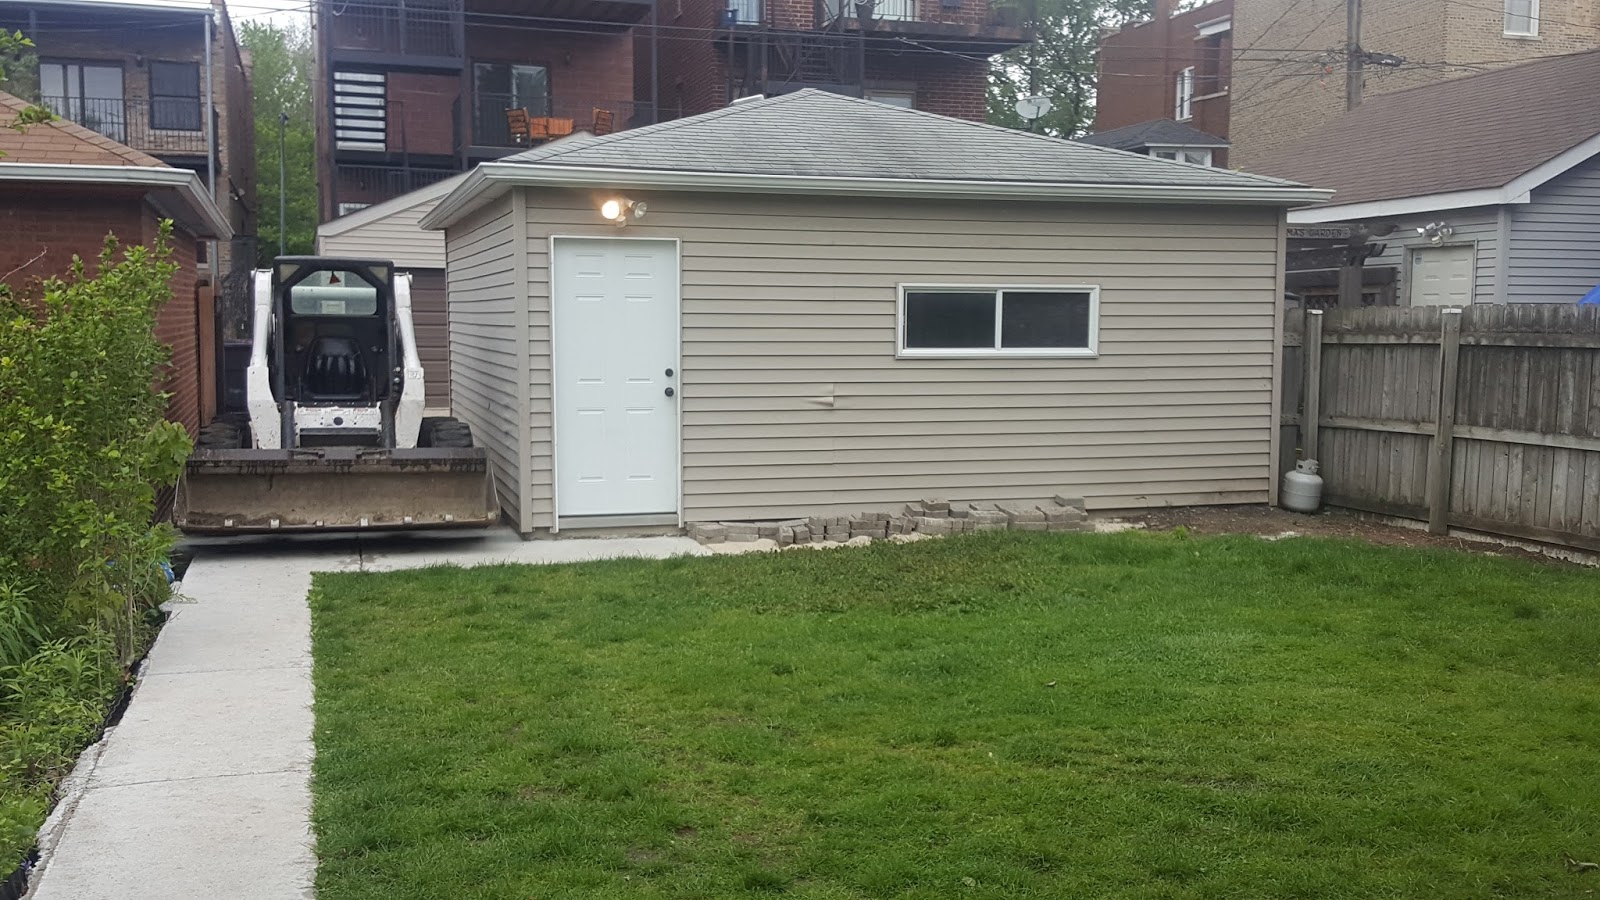 The Chicago Real Estate Local: We built a Chicago backyard basketball ...